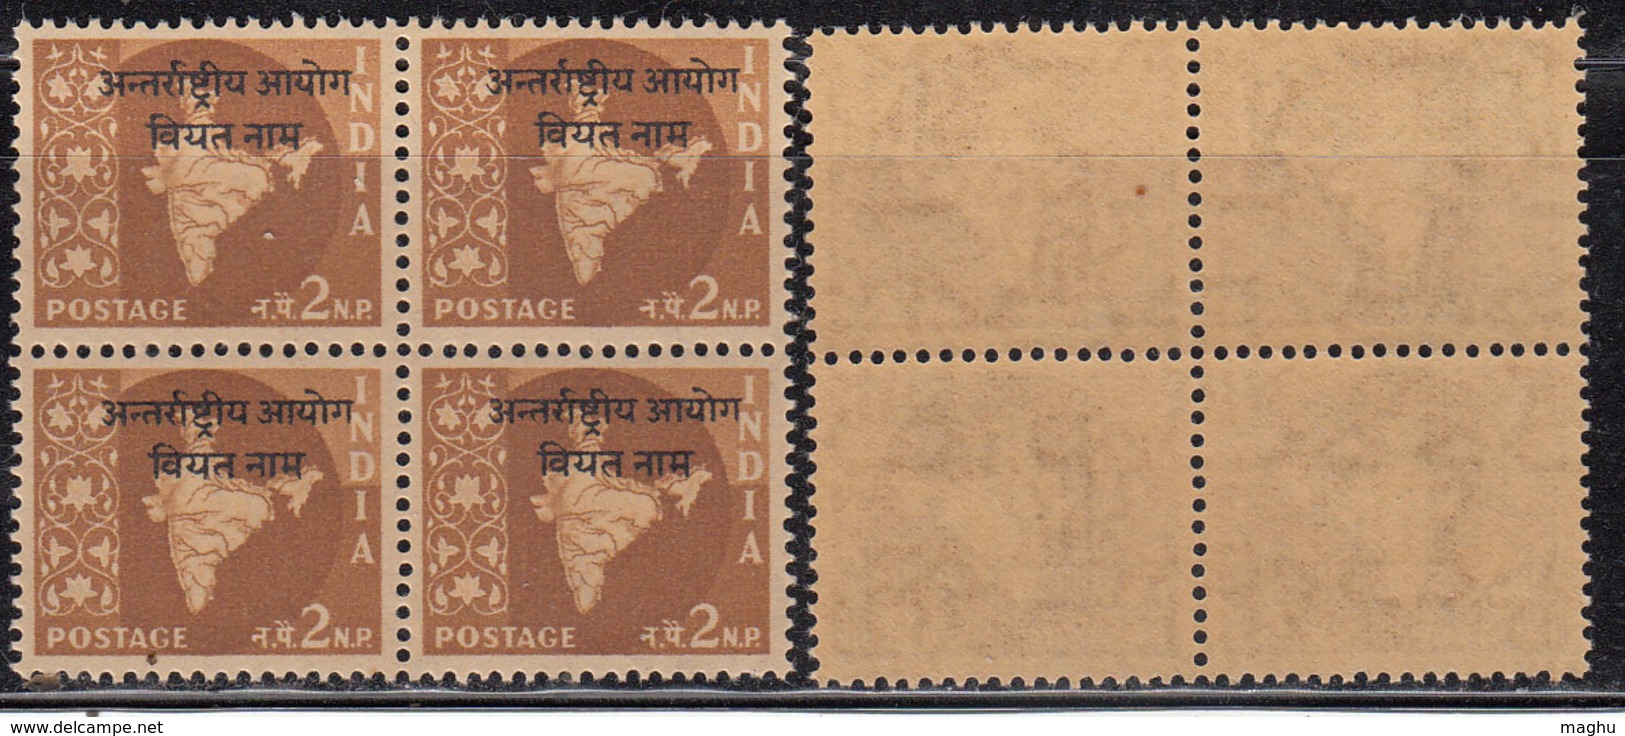 Block Of 4, 2np Ovpt Vietnam On Map Series,  India MNH 1962, Ashokan Watermark, - Franchise Militaire